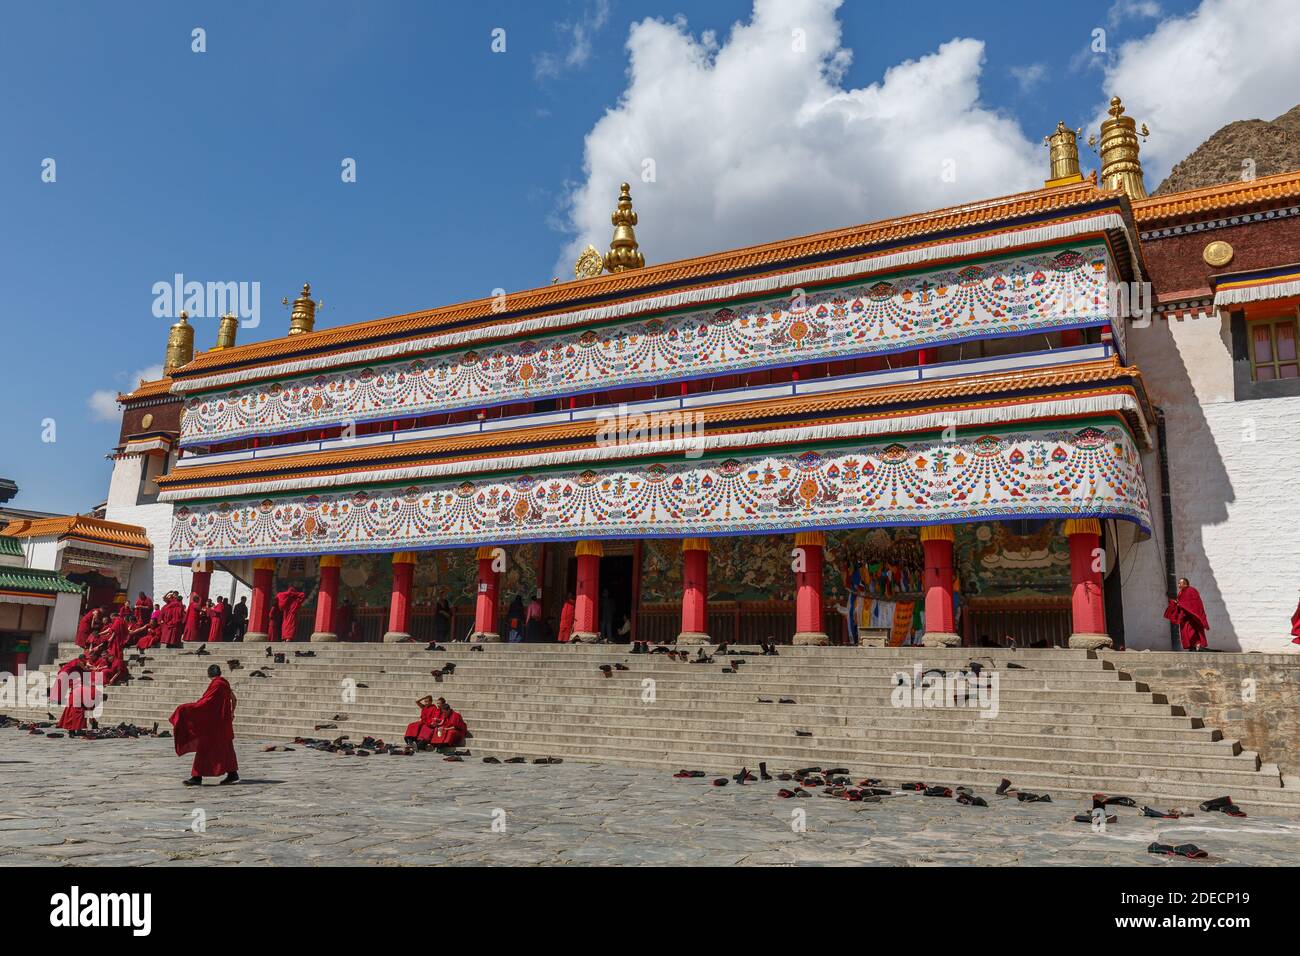 Xiahe, Gansu Province / China - April 28, 2017: View on richly ornamented building inside Labrang monastery. Largest tibetan monastery outside of Tibe Stock Photo